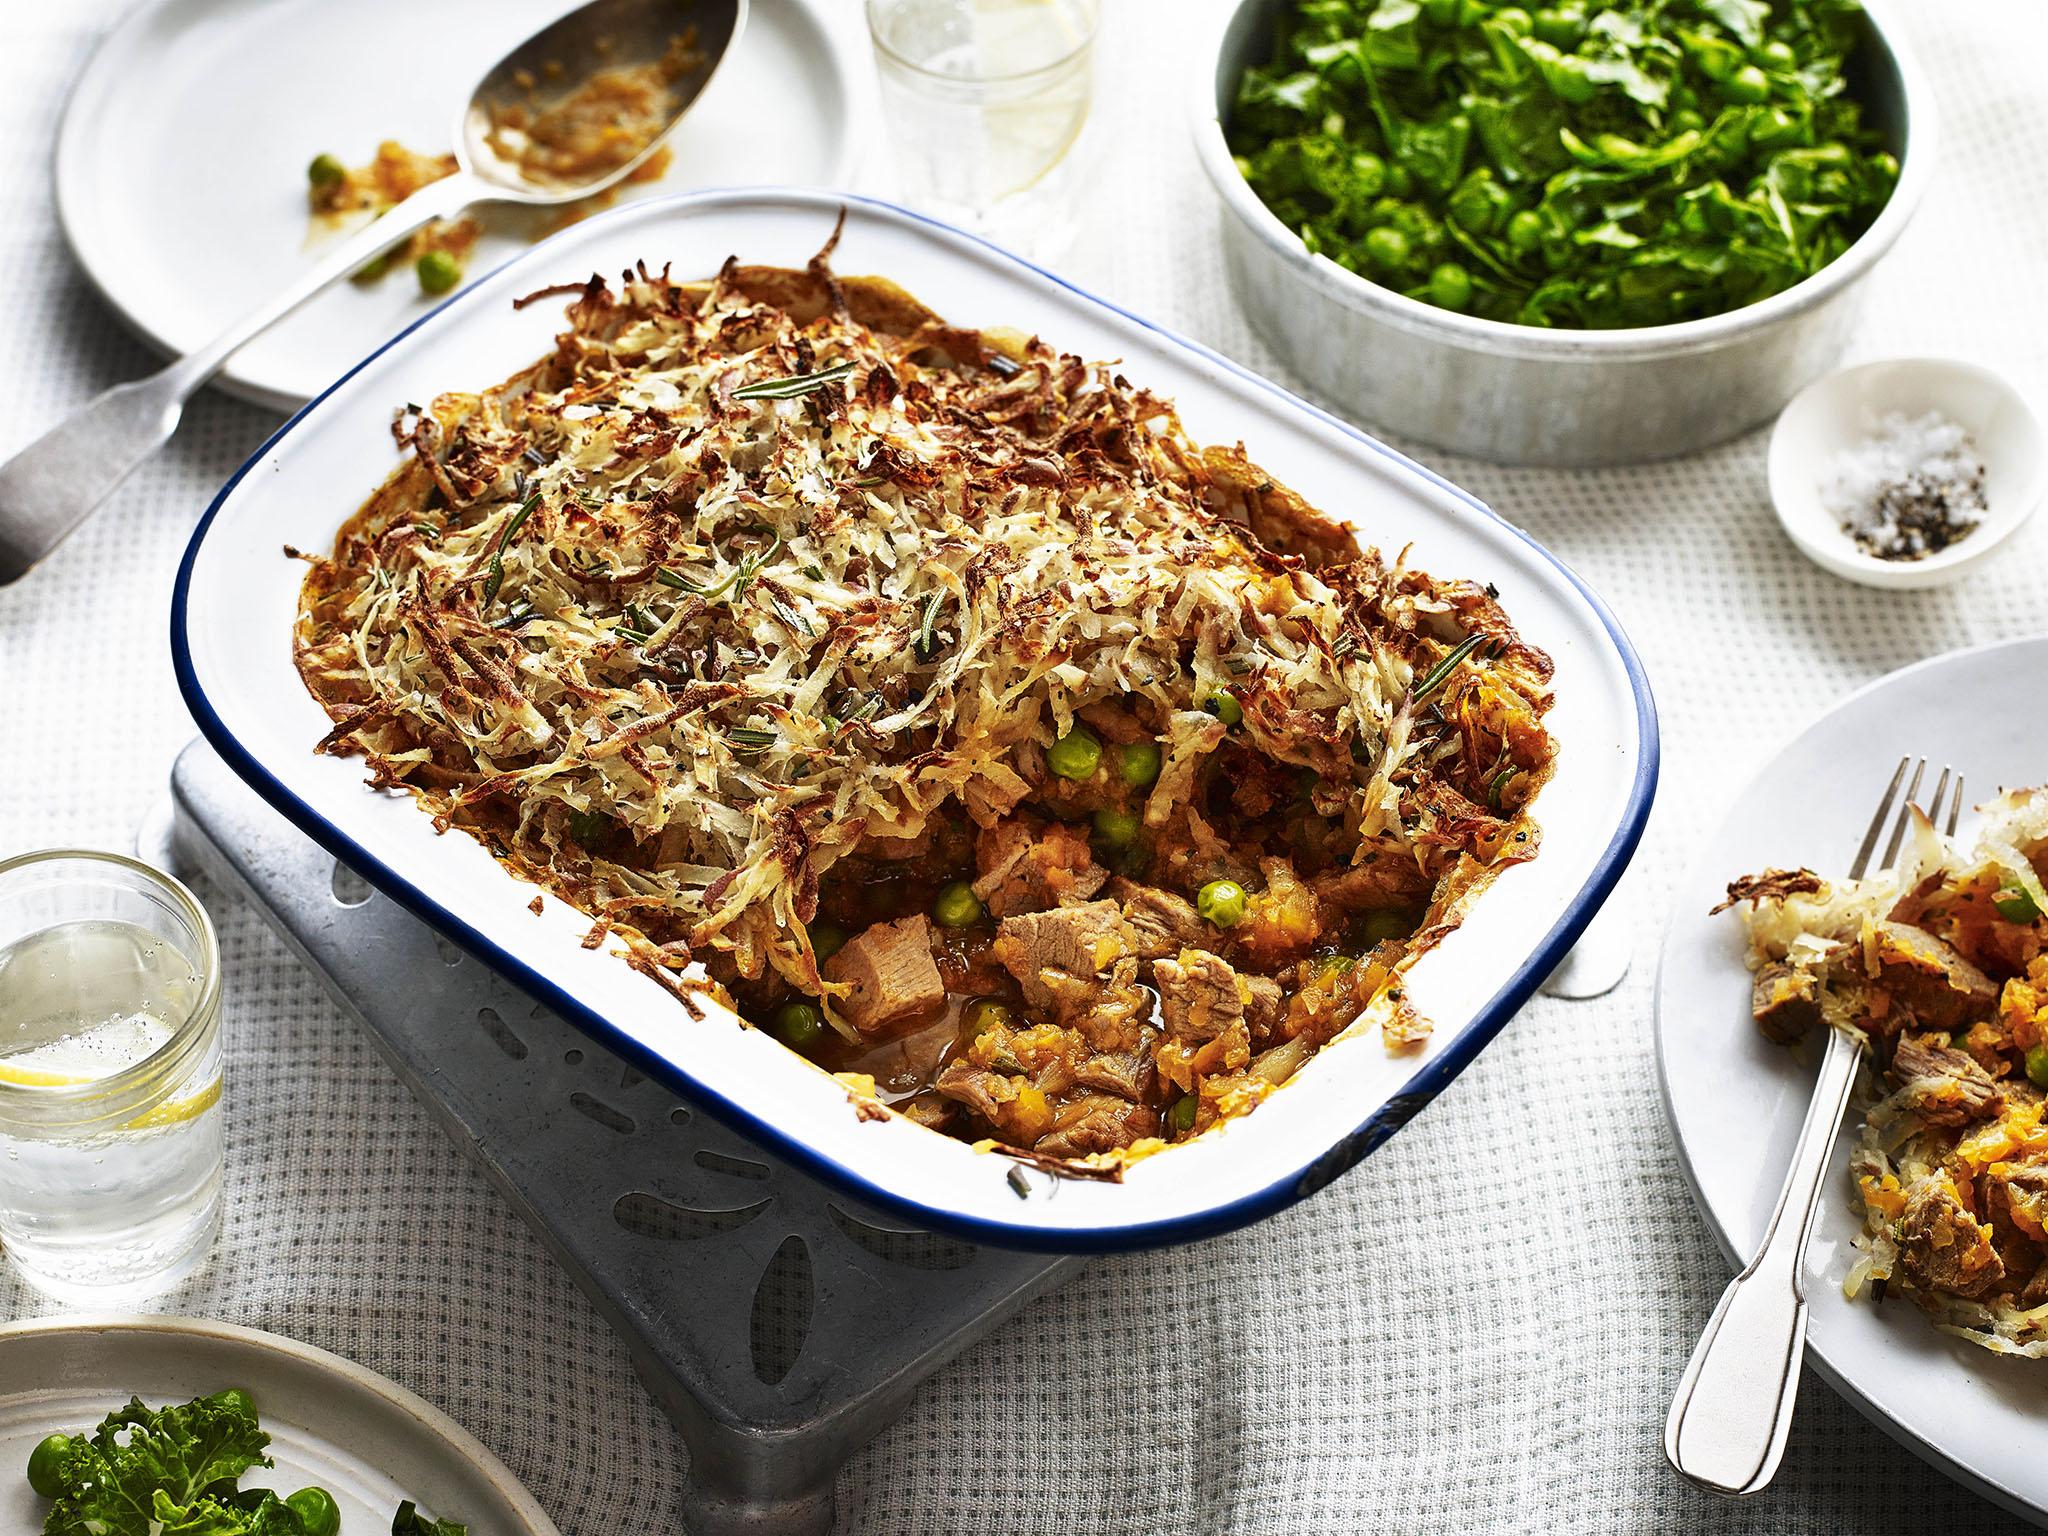 How To Make A Thatched Cottage Pie With Leftovers The Independent